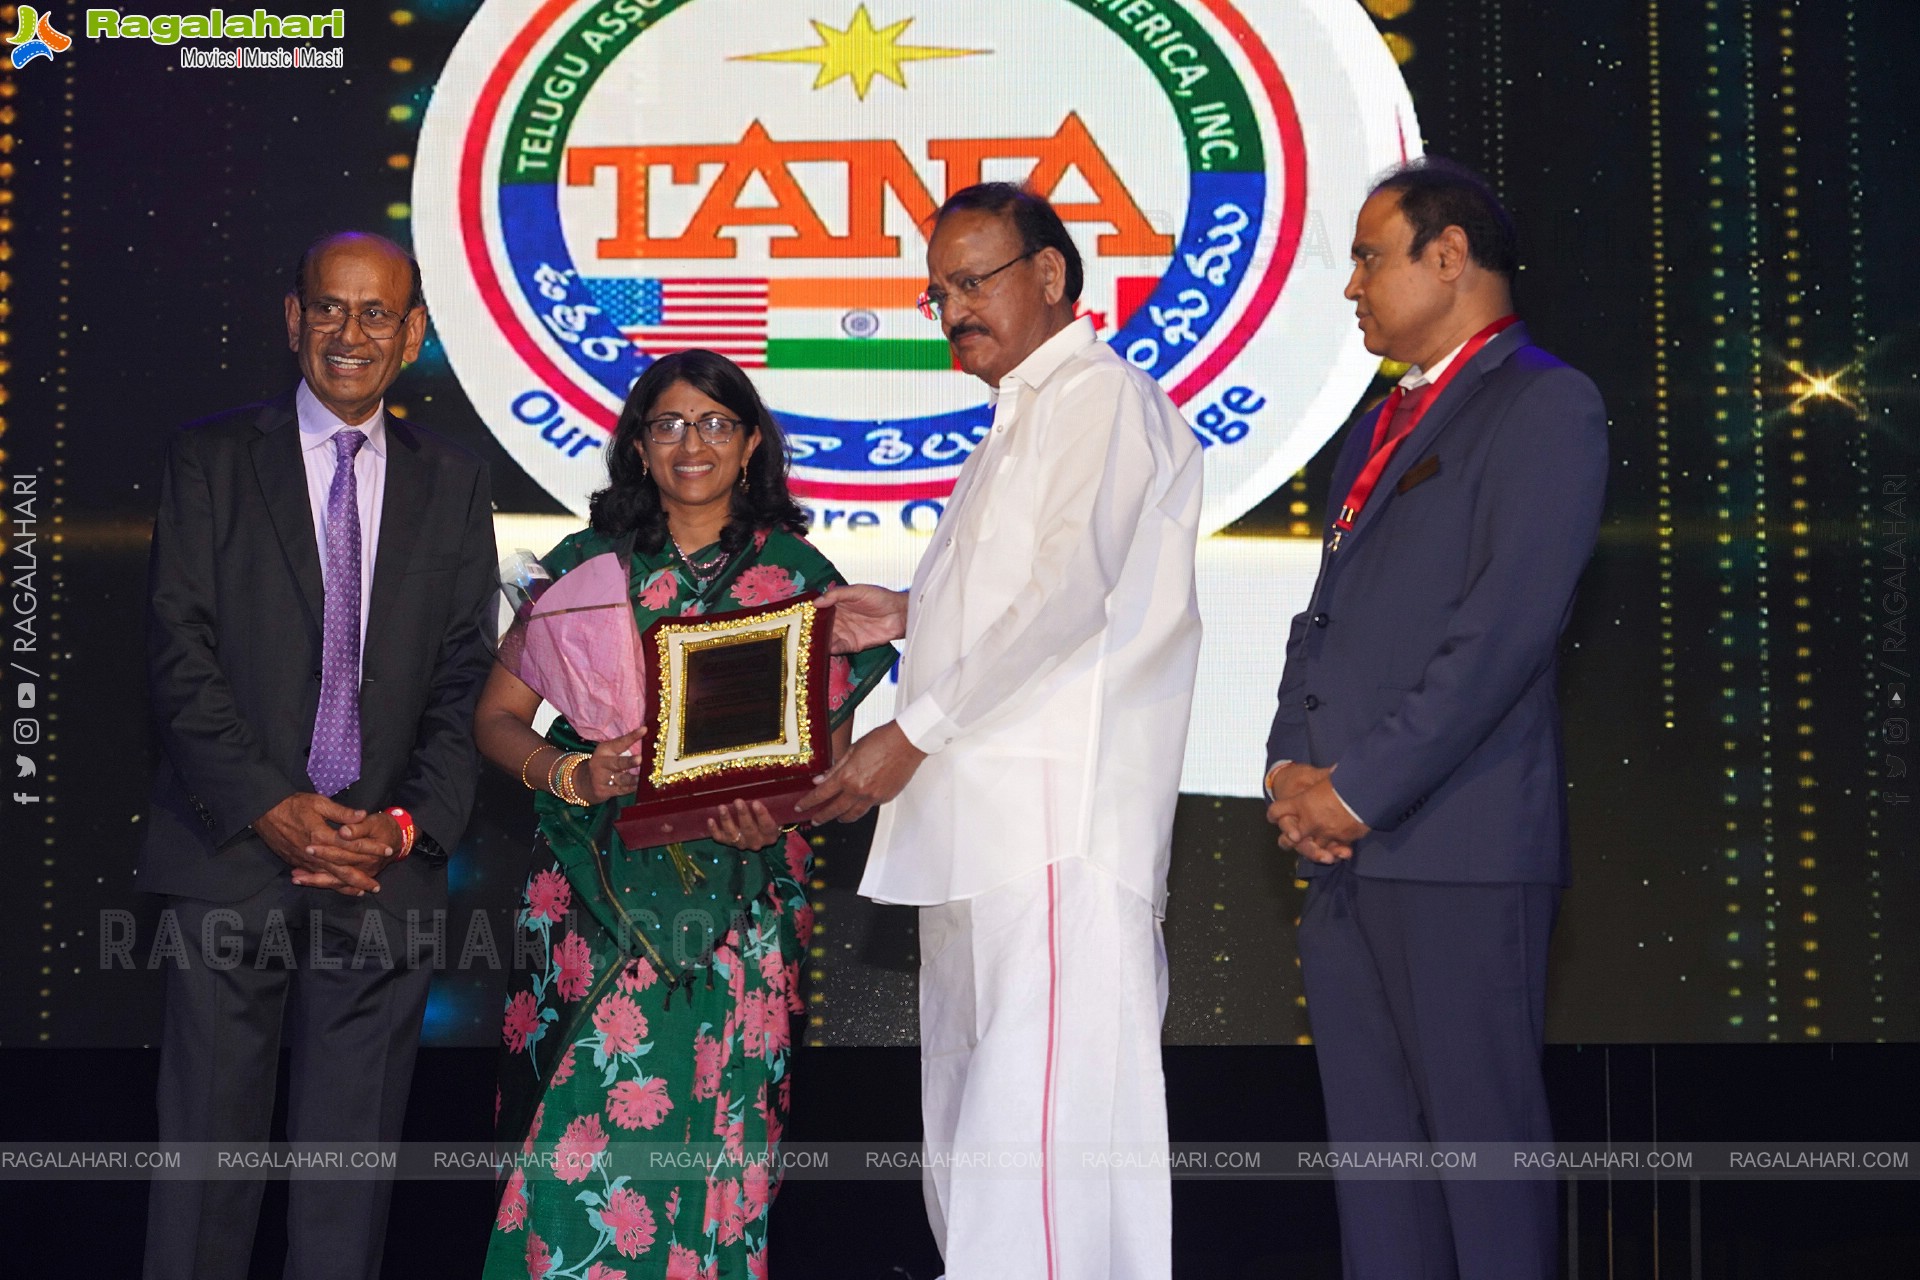 TANA Excellence & Presidential Recognition Awards @ 23rd TANA Convention Banquet Philadelphia